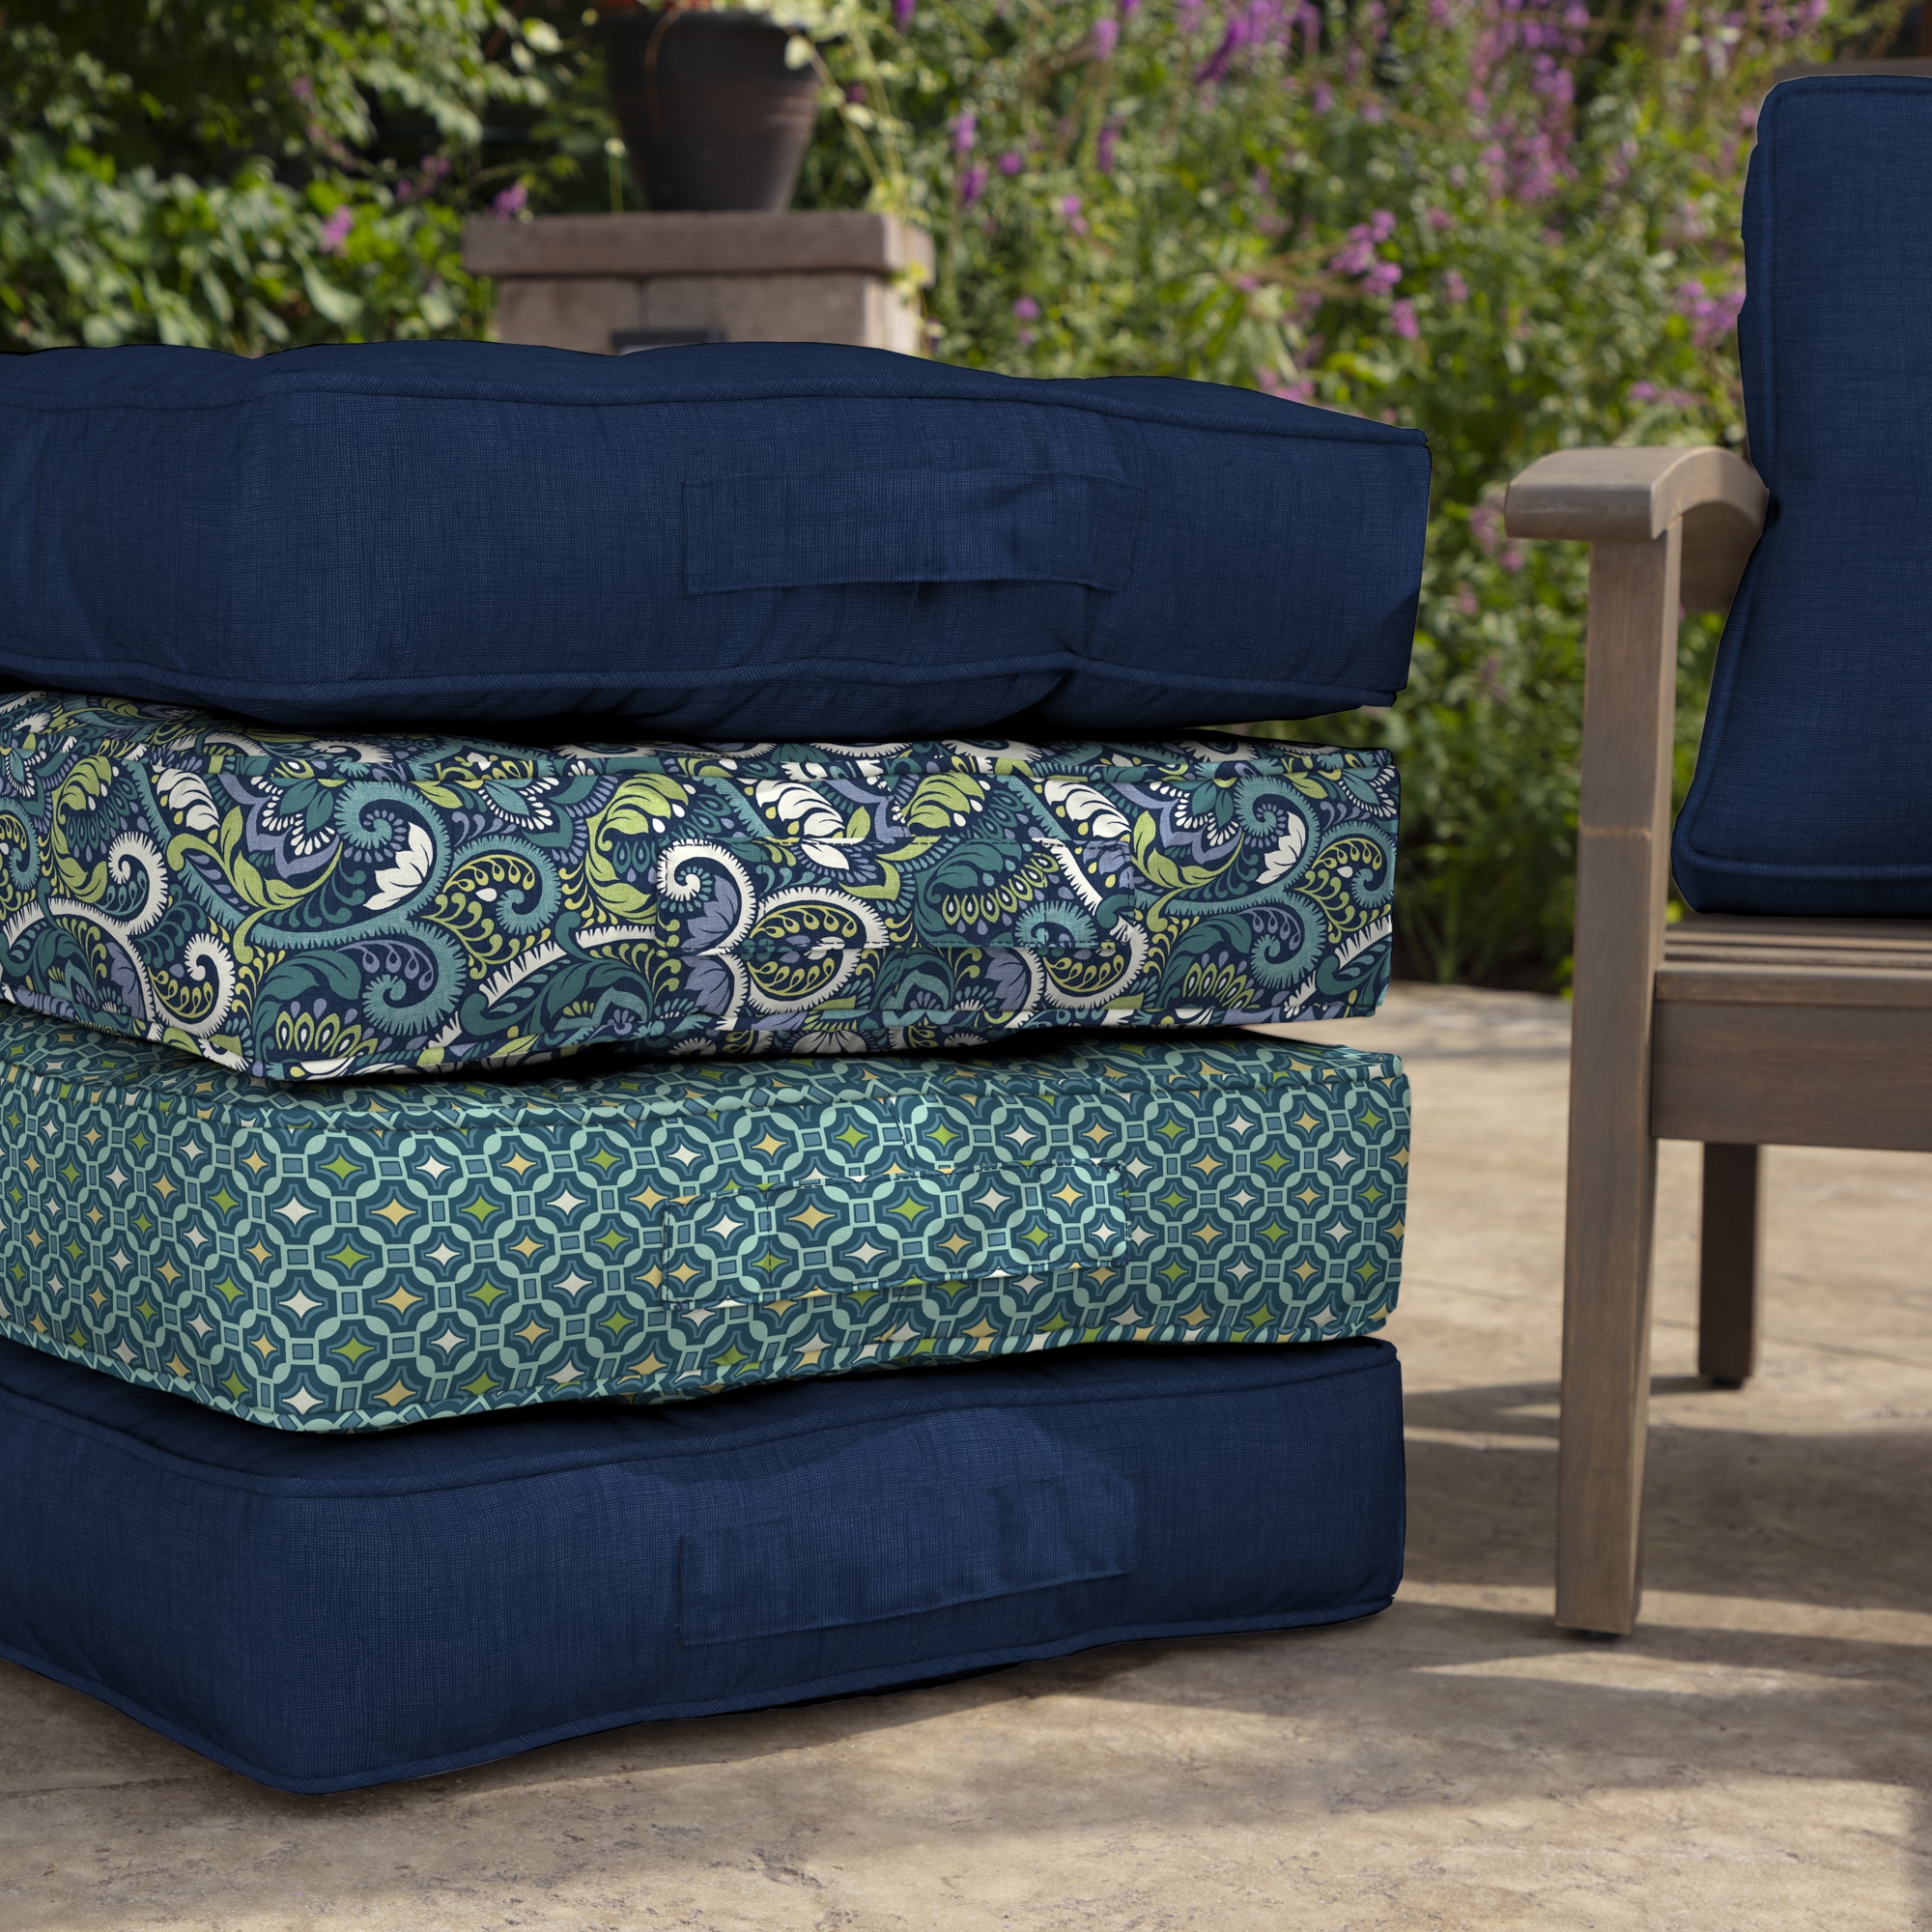 Arden Selections Outdoor Plush Classic Tufted Blowfill Deep Seat Set, 24 x  24, Water repellent, Fade Resistant, Deep Seat Bottom and Back Cushion for